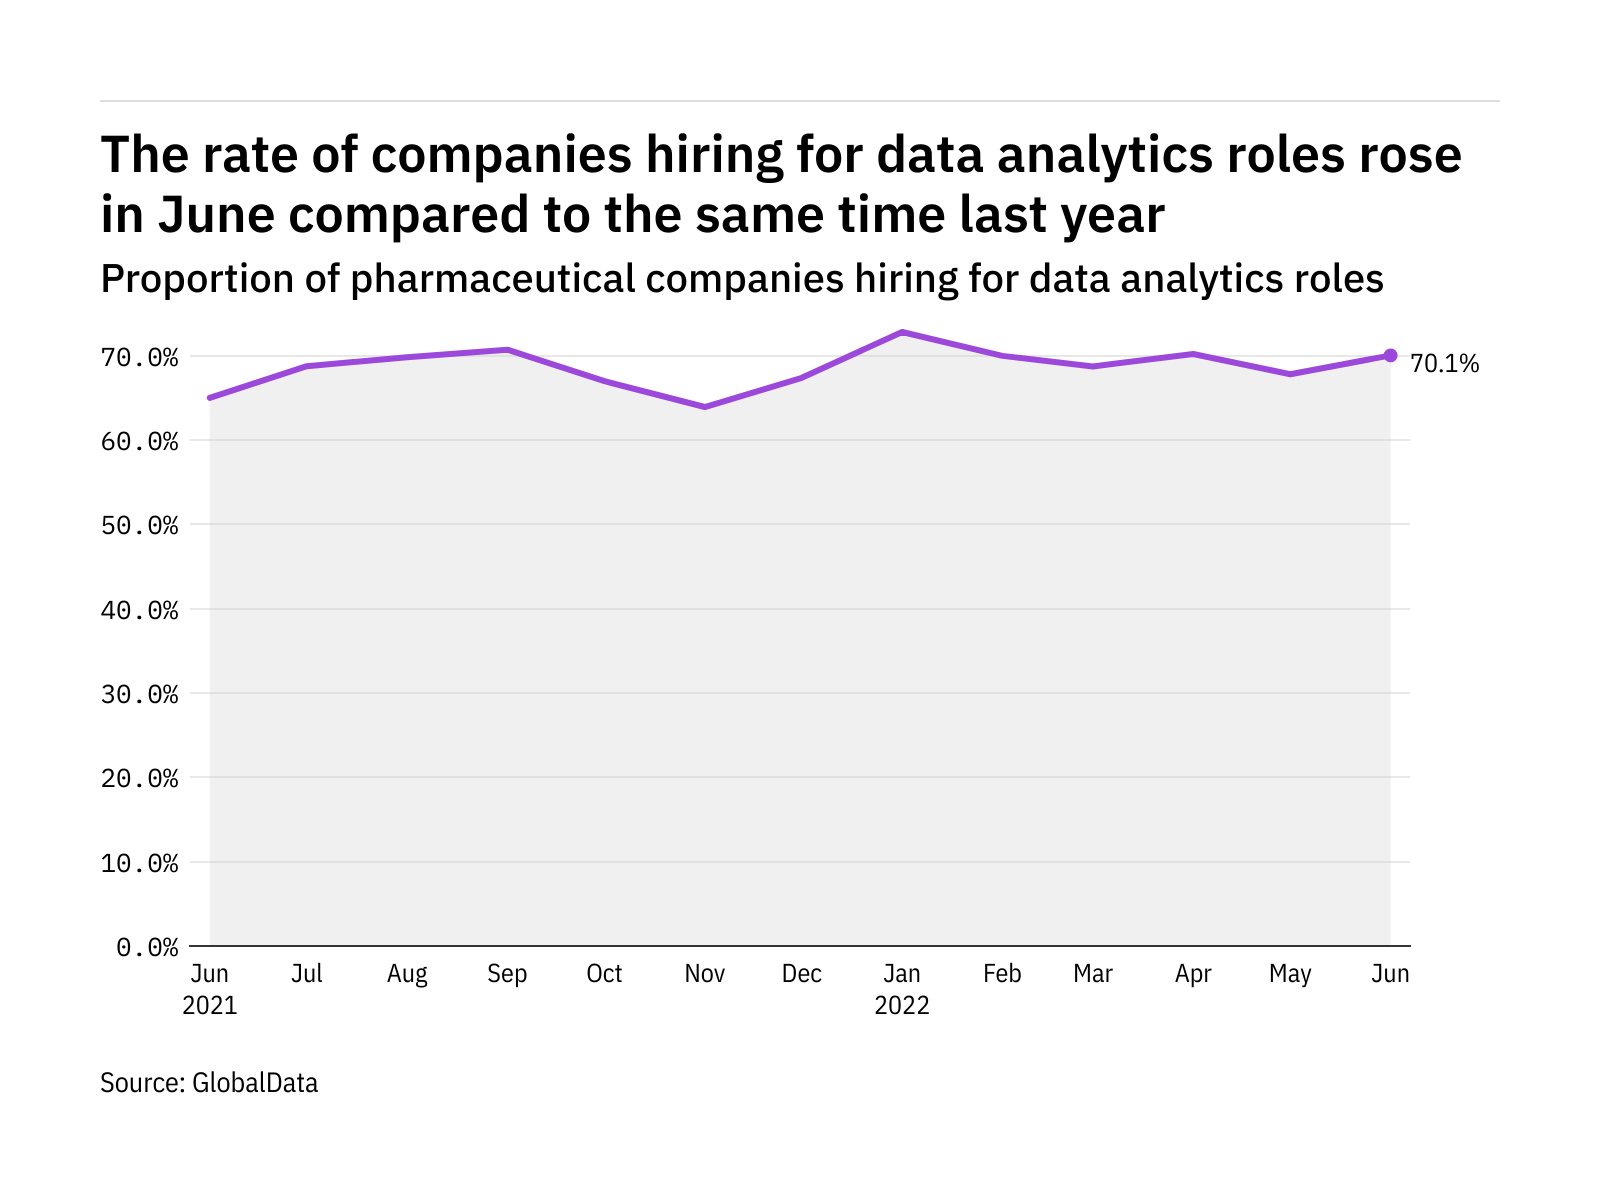 Data analytics hiring levels in the pharmaceutical industry rose in June 2022